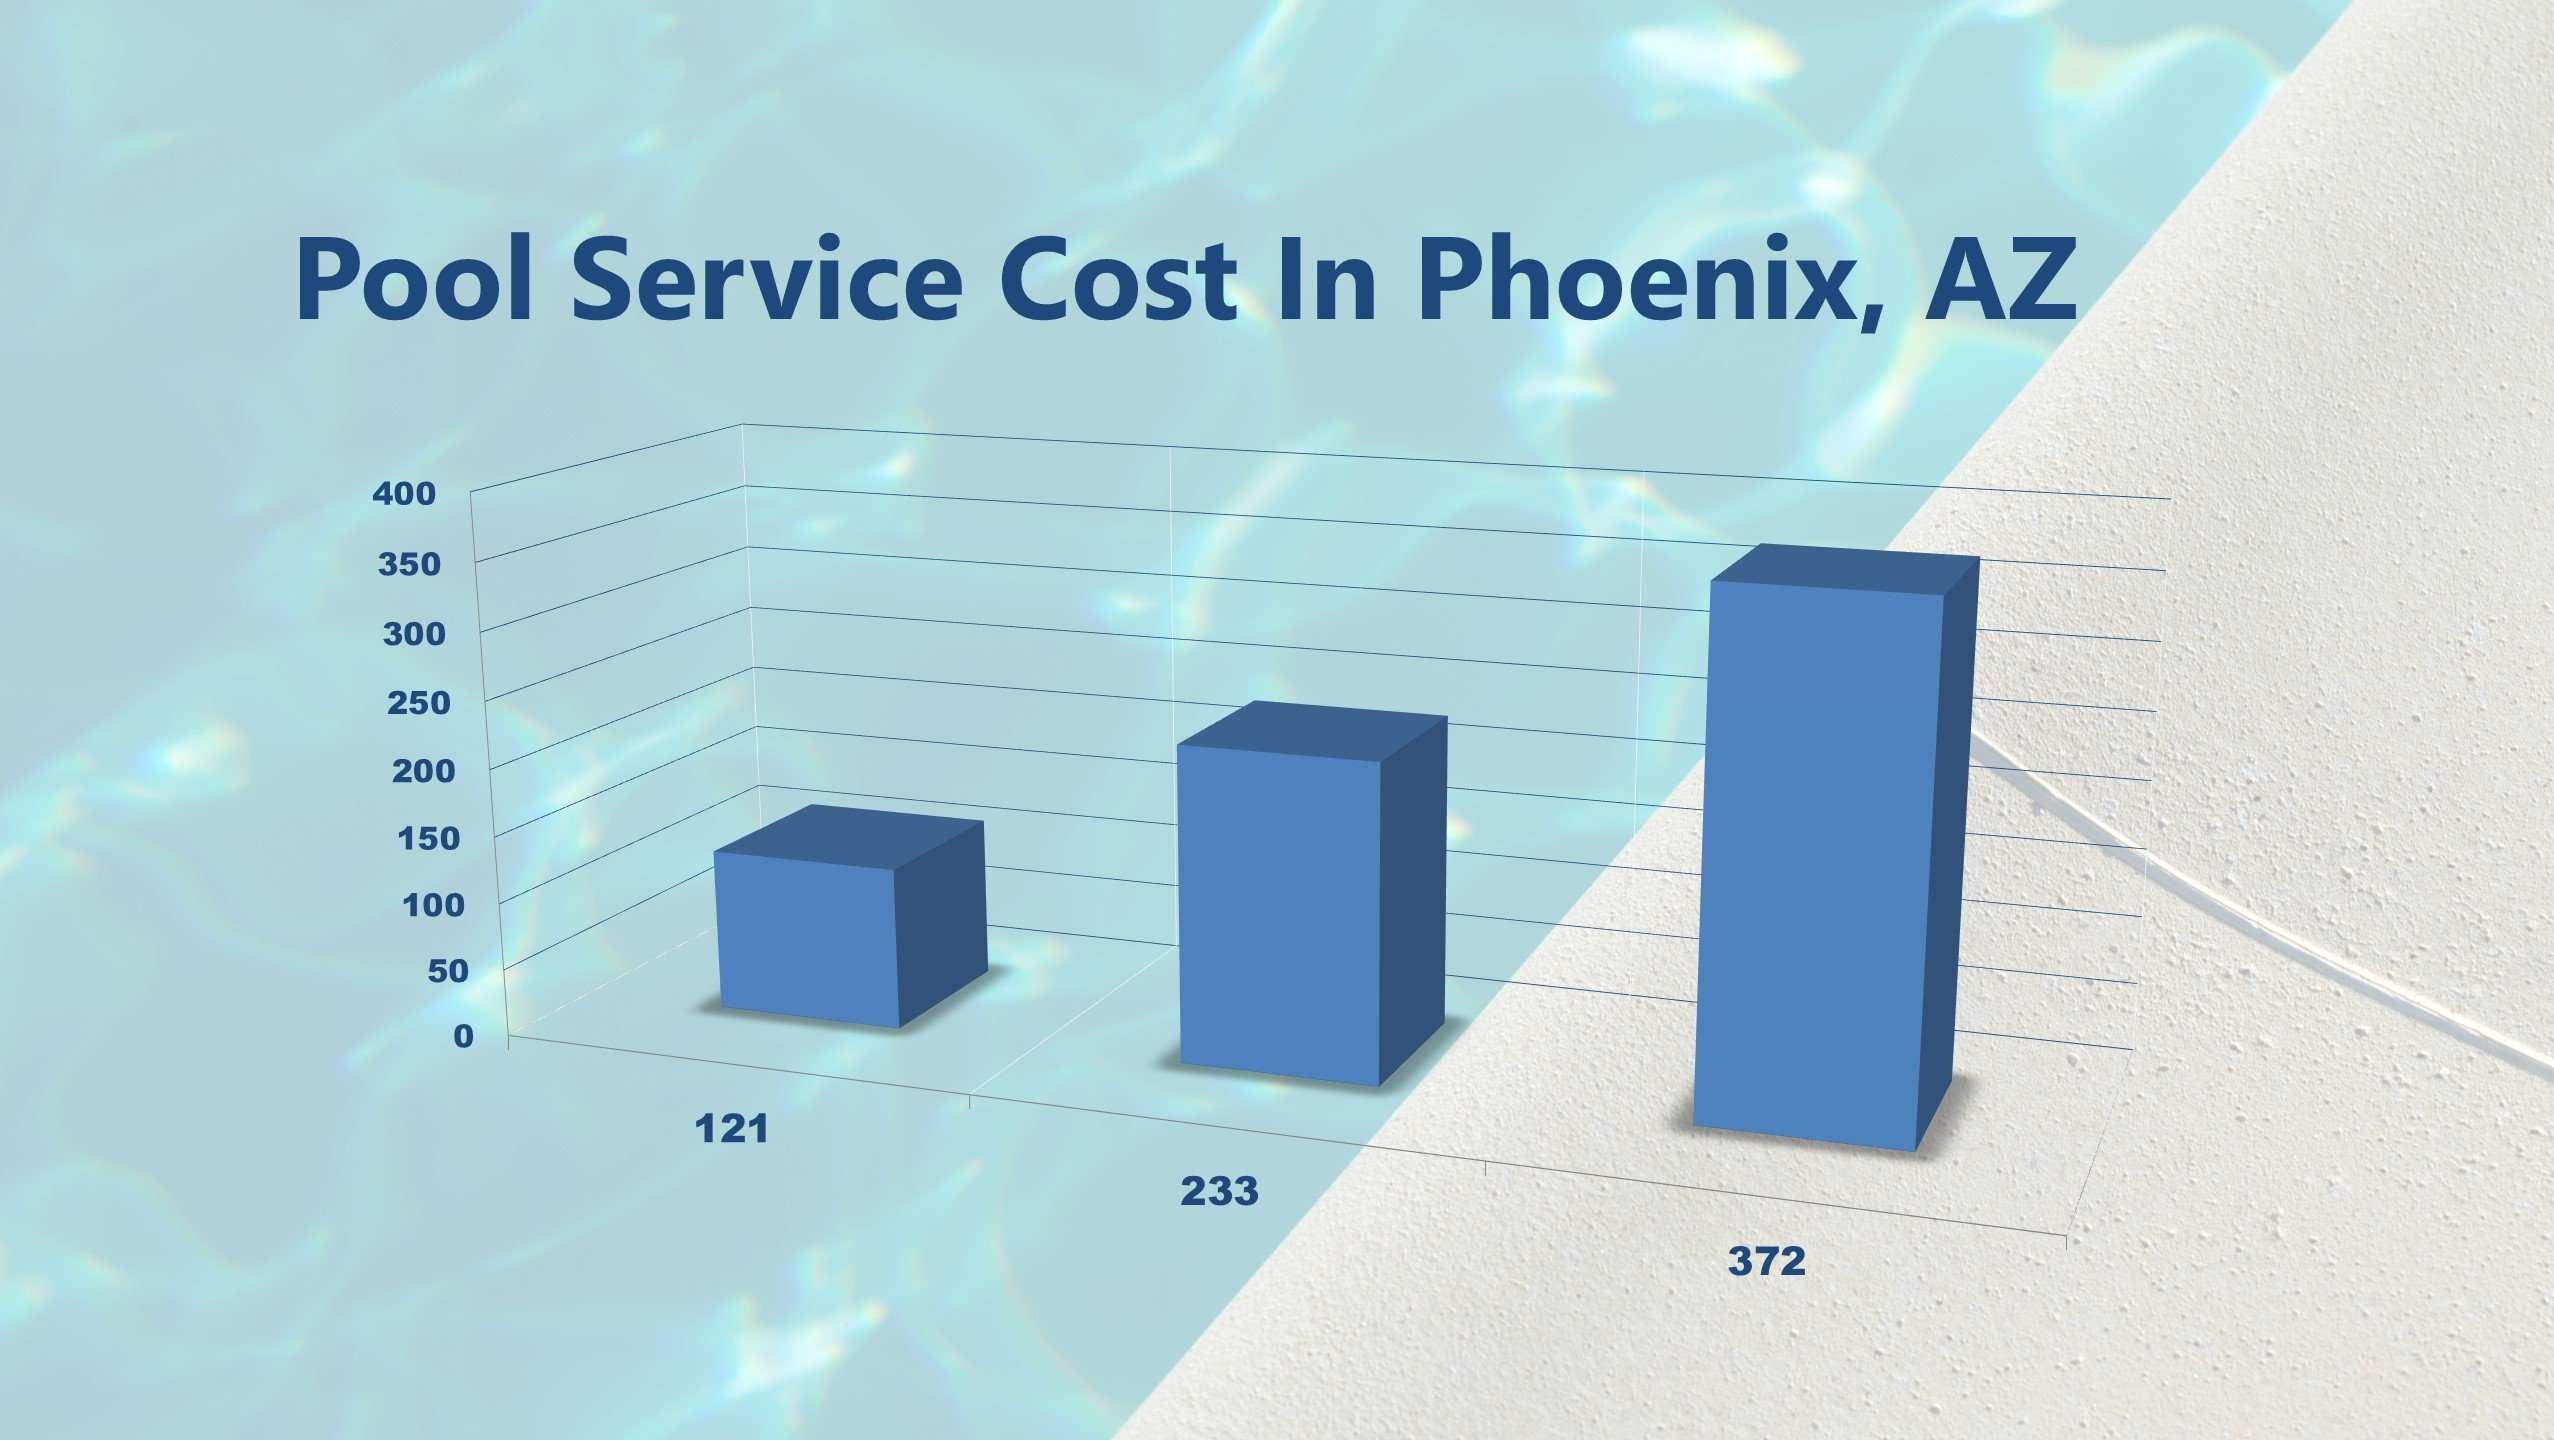 How Much Does Pool Service Cost In Phoenix?